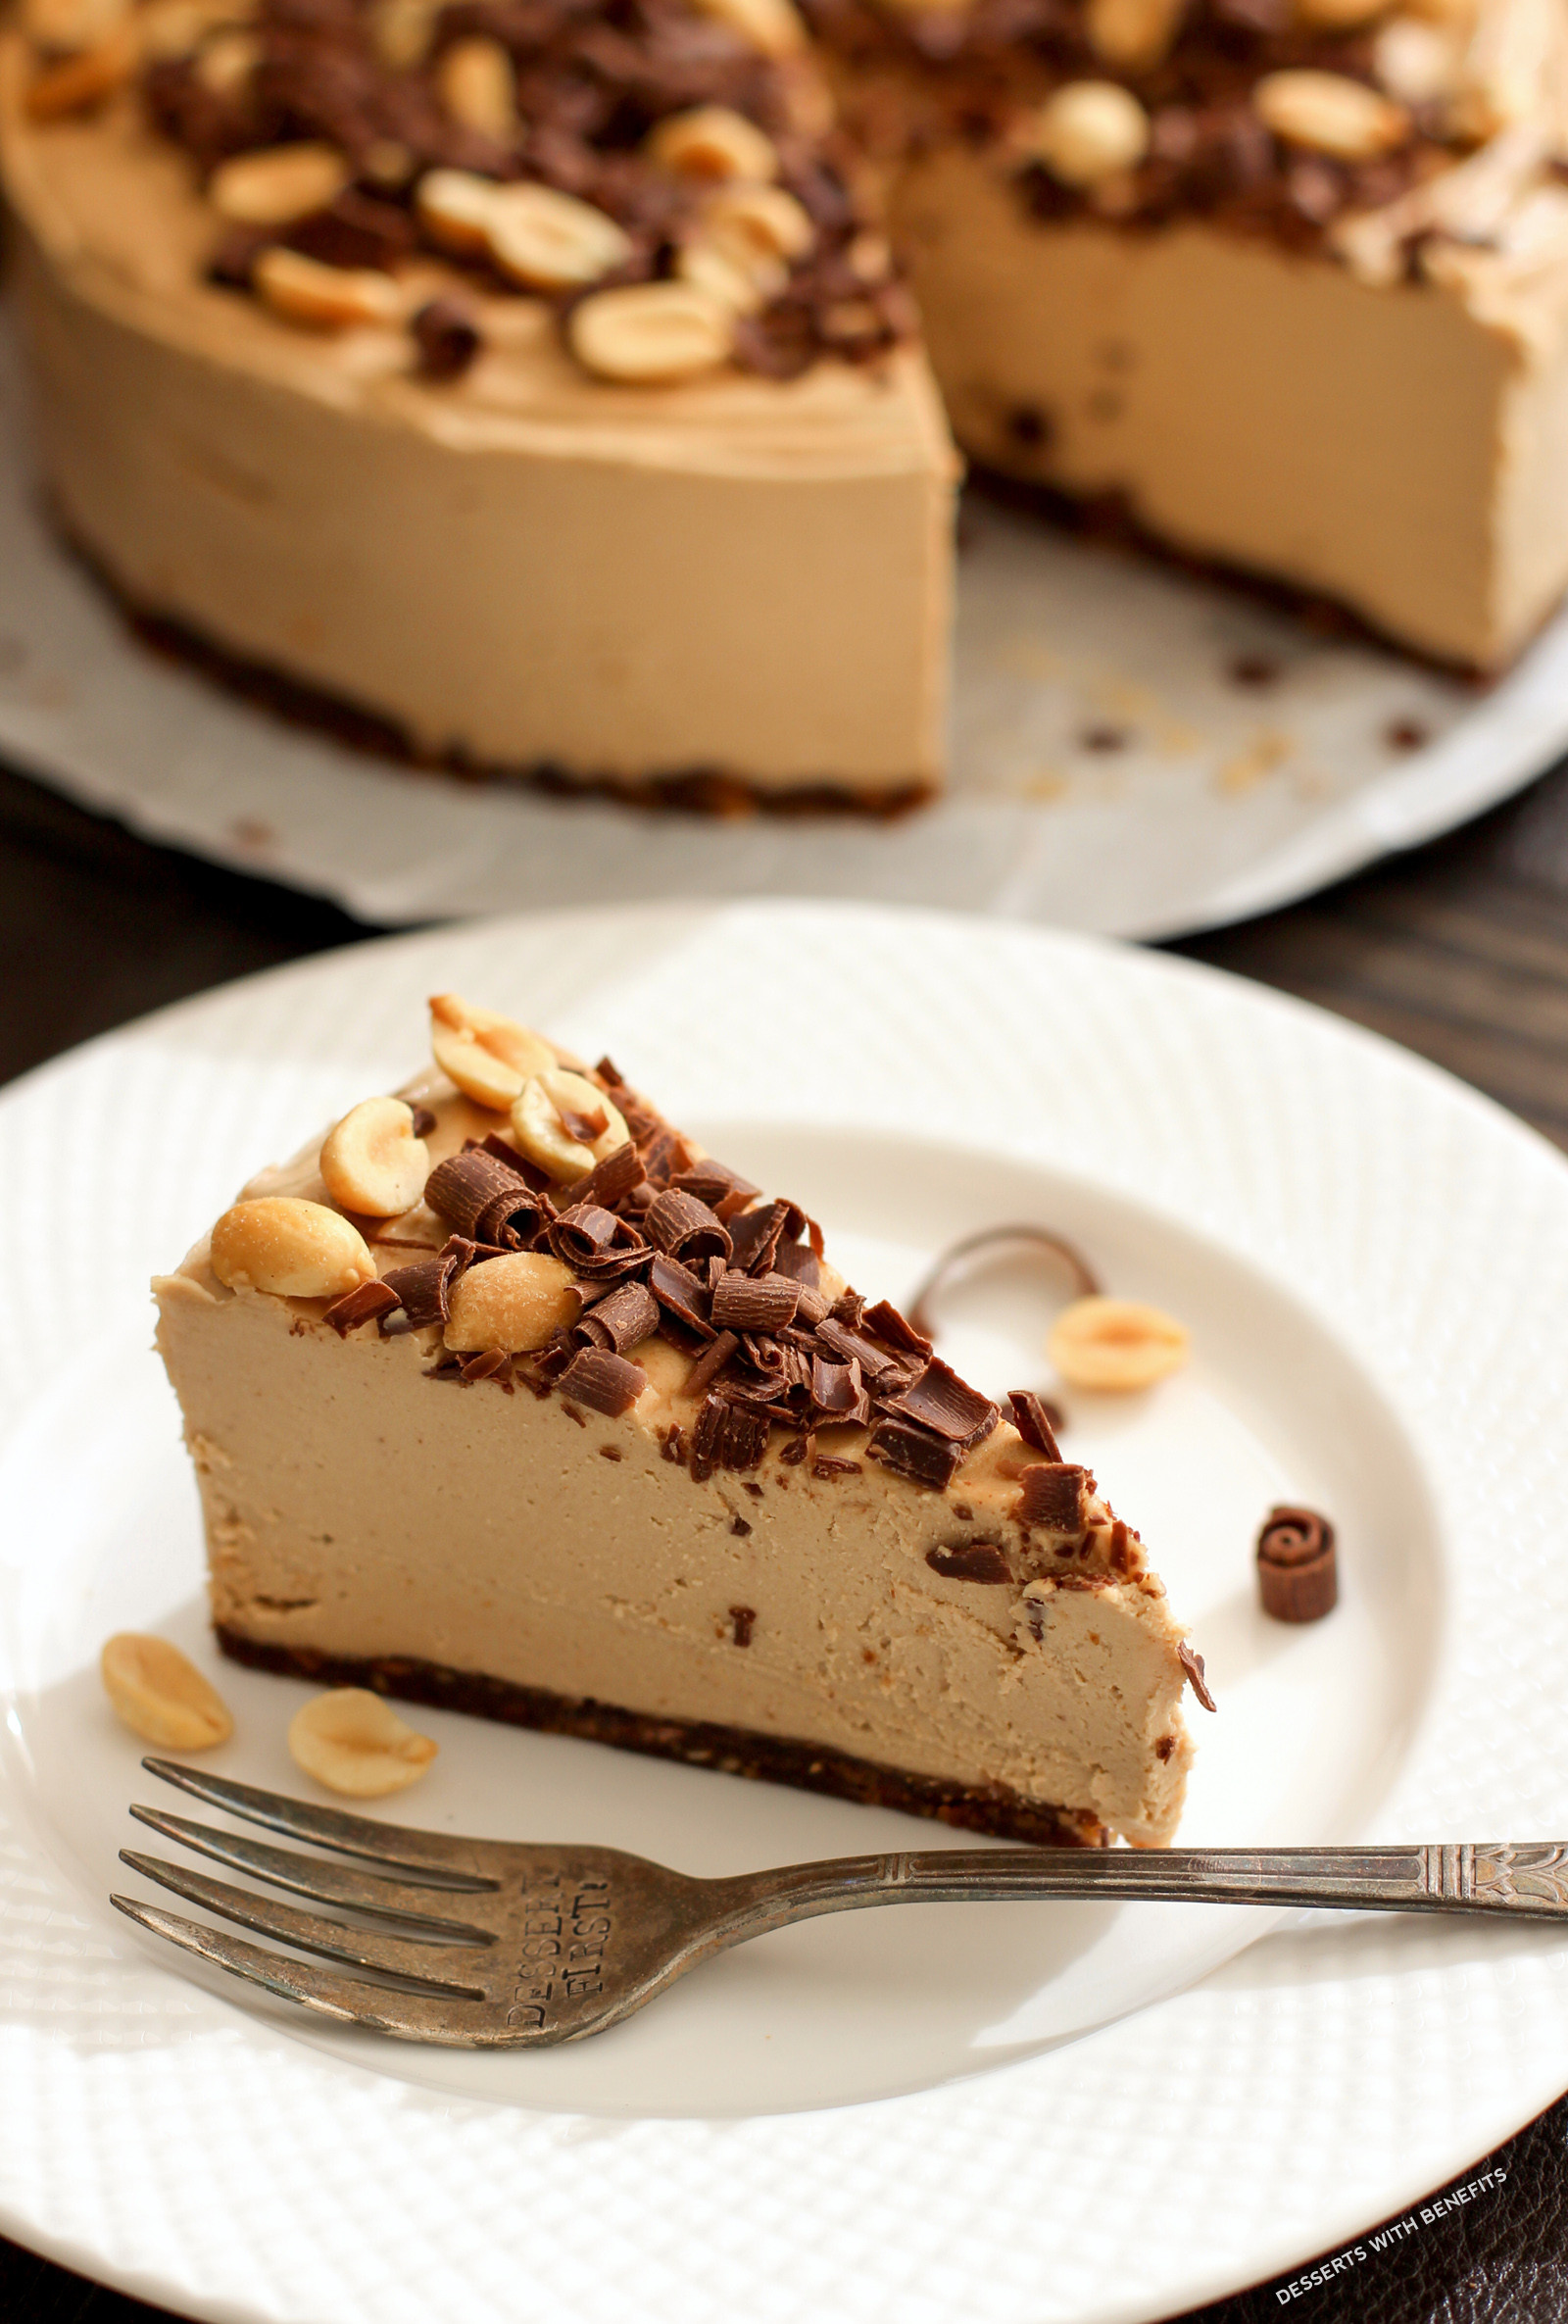 Healthy Peanut Butter Desserts
 Healthy Chocolate Peanut Butter Raw Cheesecake